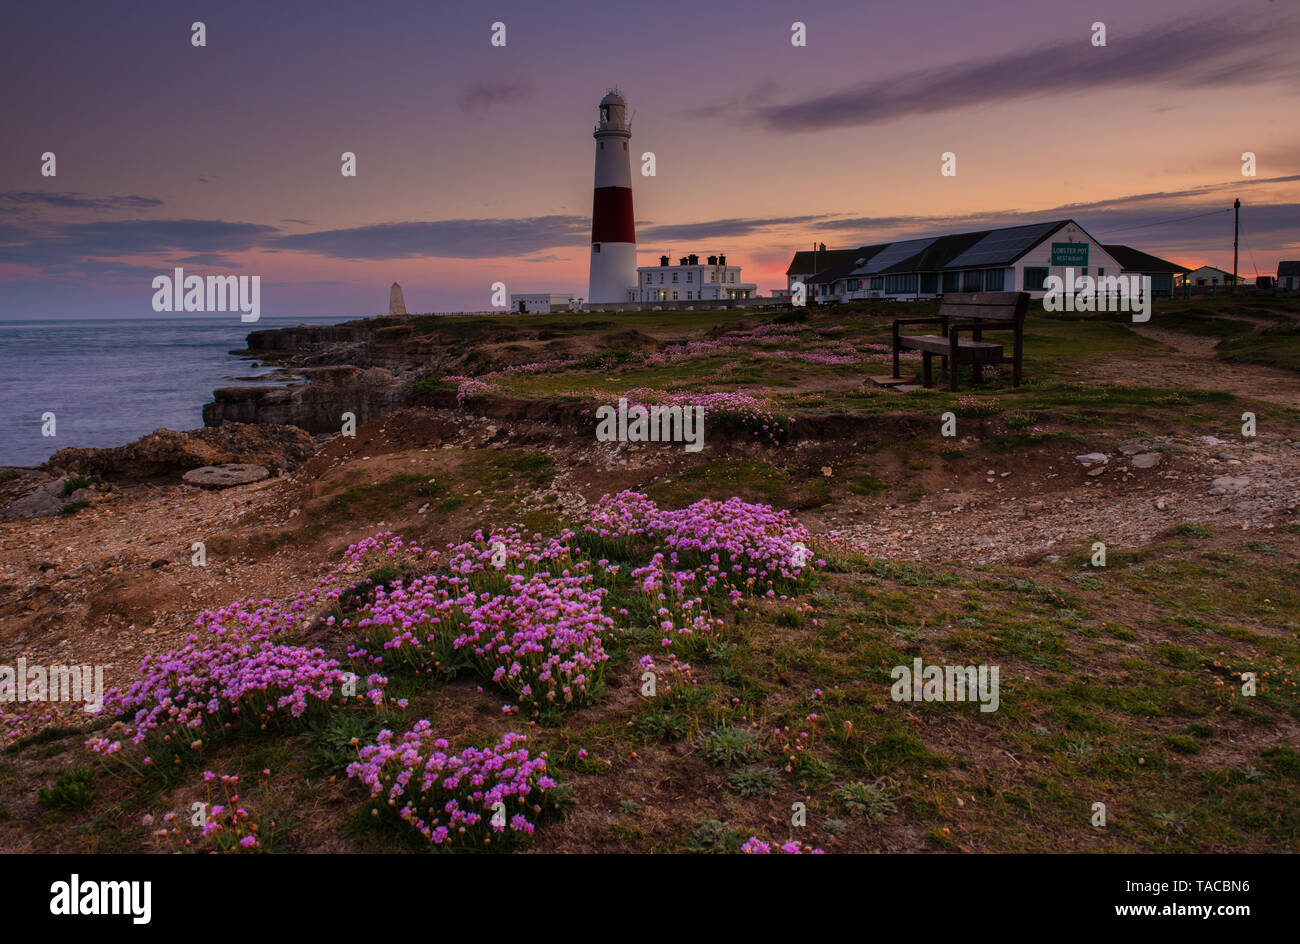 Portland, Dorset, UK. 23rd May 2019. UK Weather: The sun sets behind the iconic Portland Bill lighthouse on the Isle of Portland at the end of a beautiful spring day.  The delicate pink sea thrift flowers are in full bloom making the lighthouse particularly pictureseque at this time of year.  Credit: Celia McMahon/Alamy Live News. Stock Photo